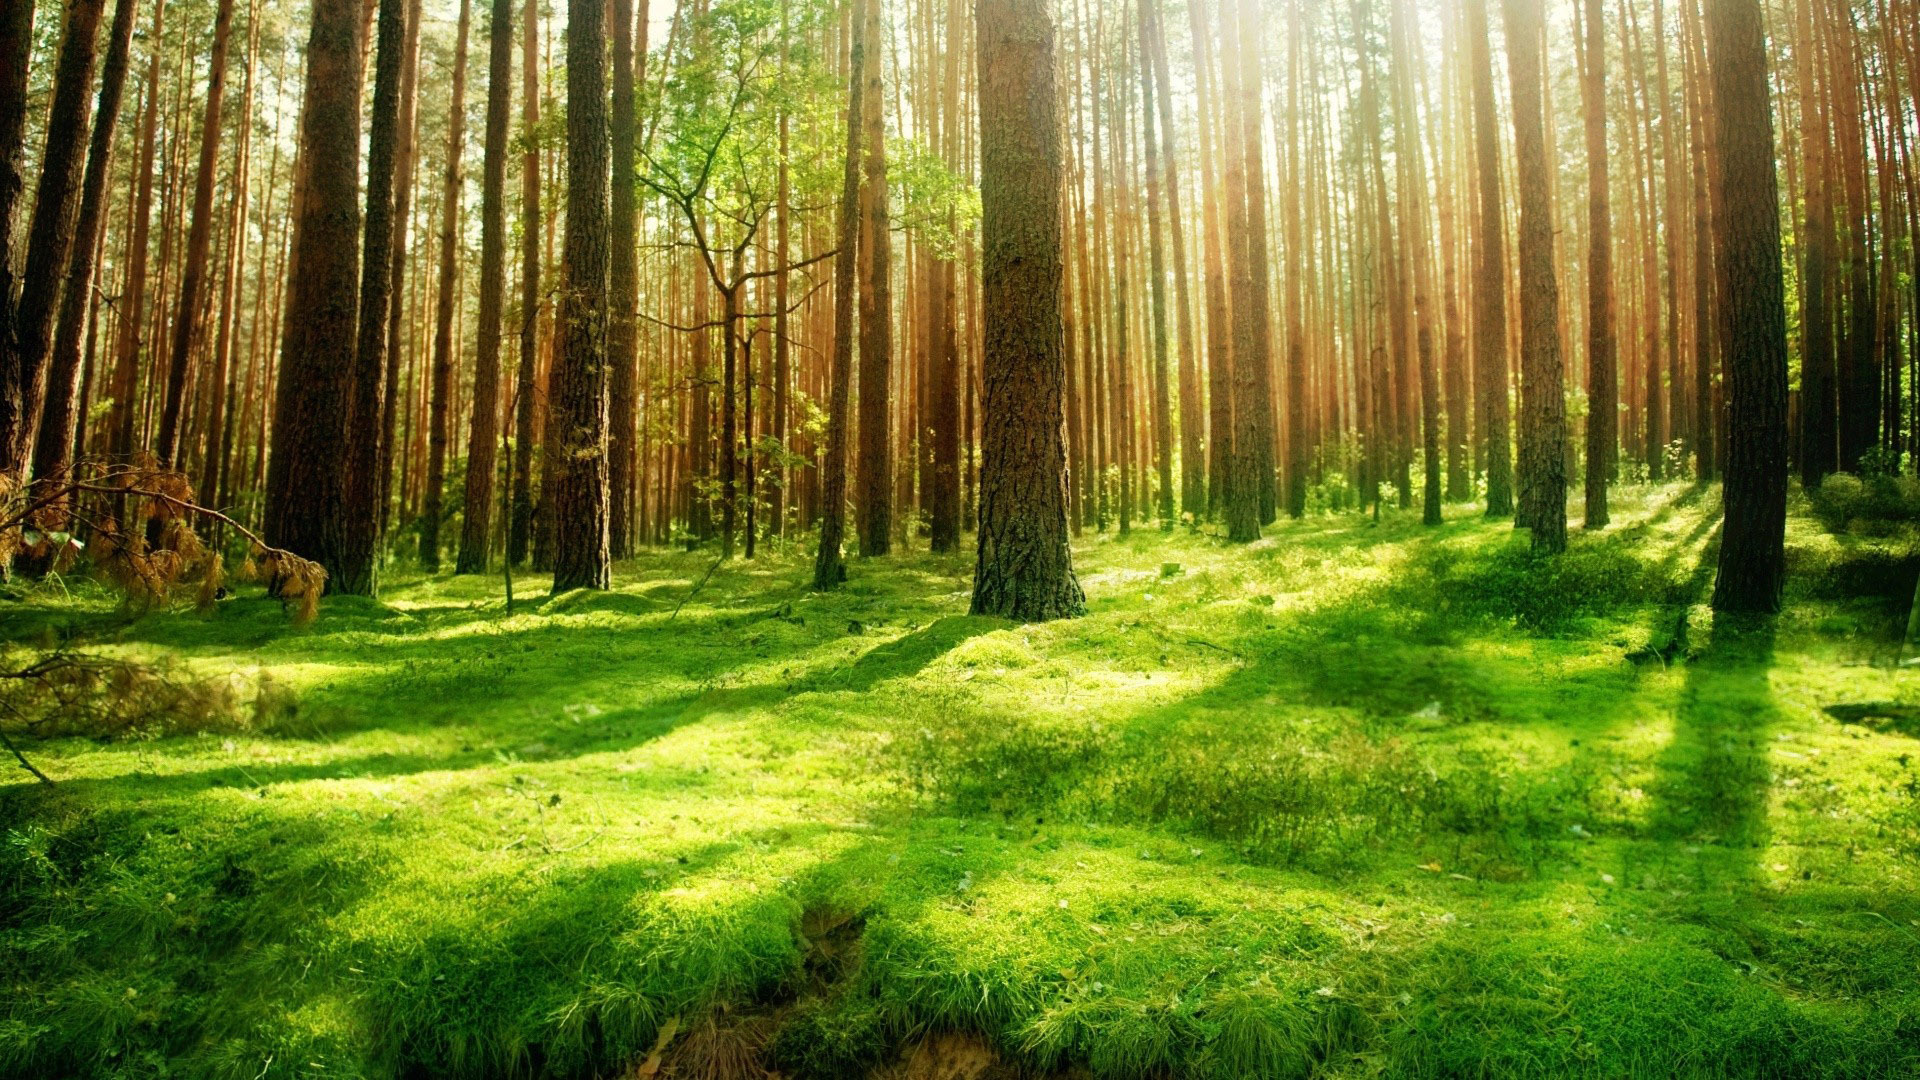 Forest Background wallpaper 1920x1080 2959